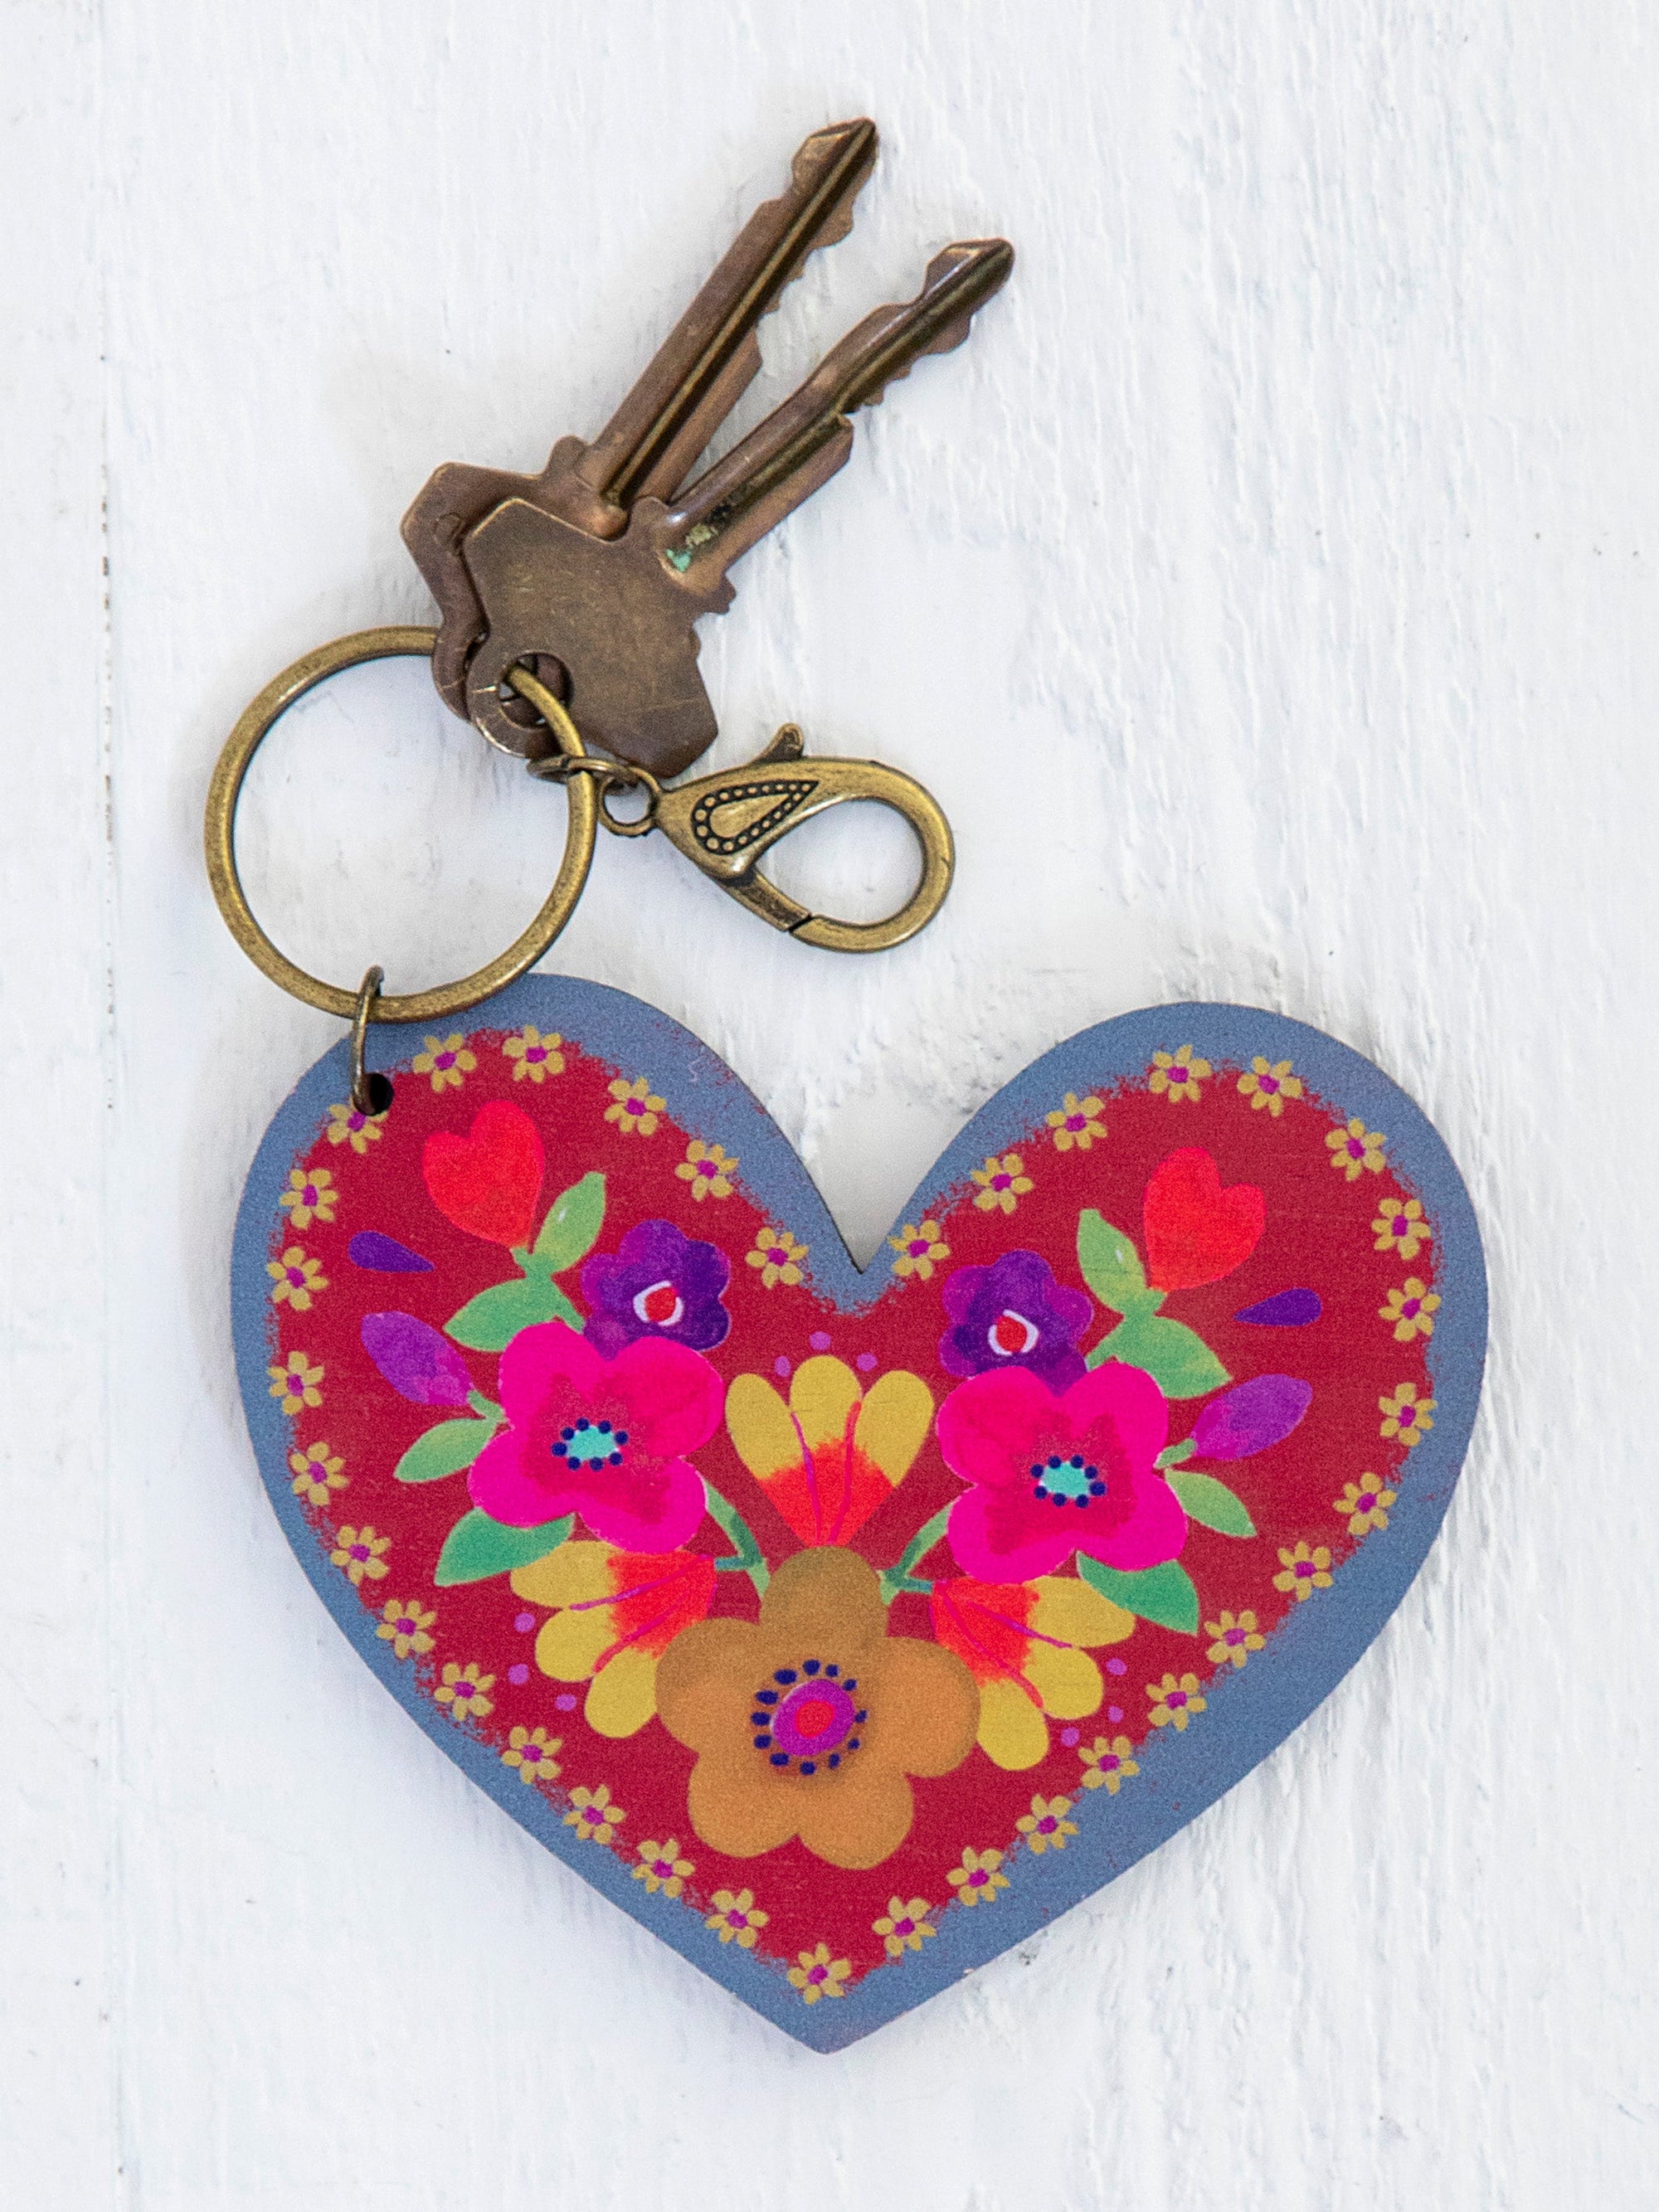 "Heart" Wooden Painted Key Chain